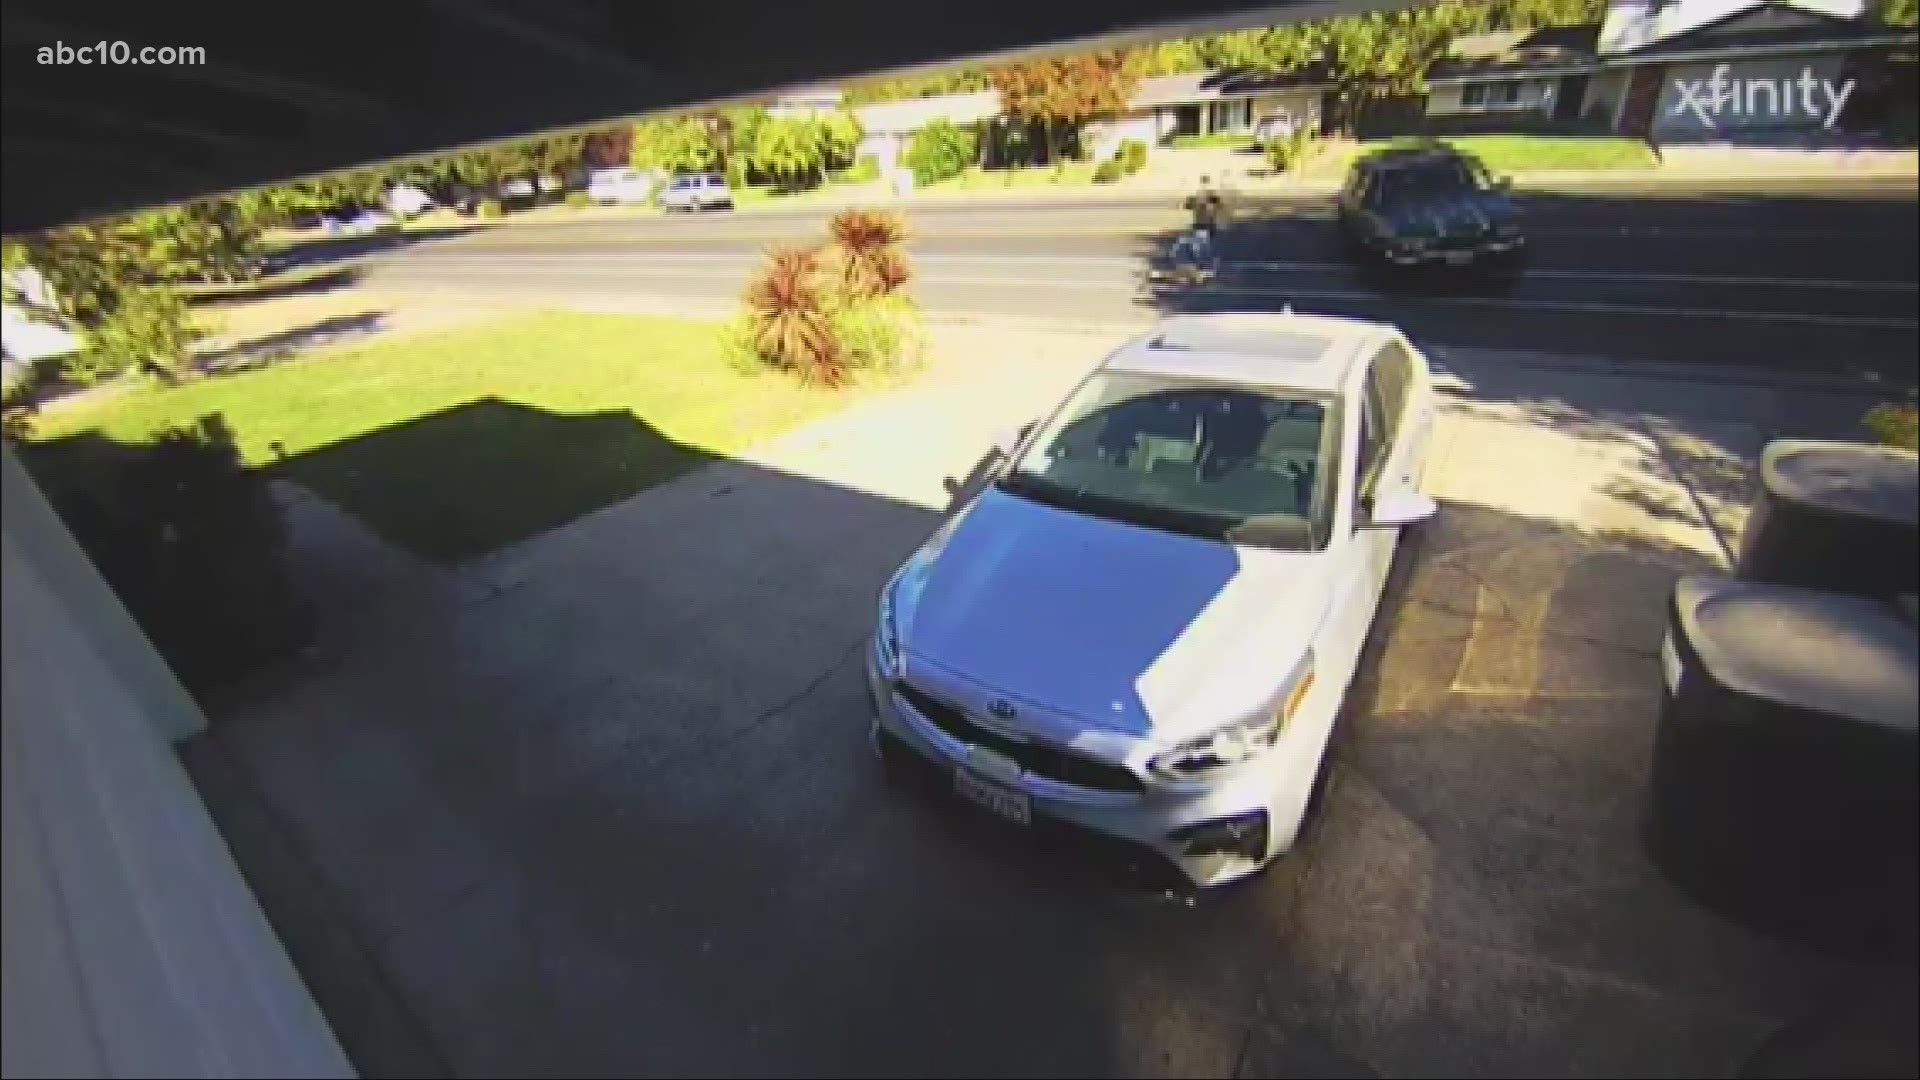 The video was posted to the Sacramento subreddit in hopes of catching the driver. Moments after missing the man, the driver also ran into a fence.